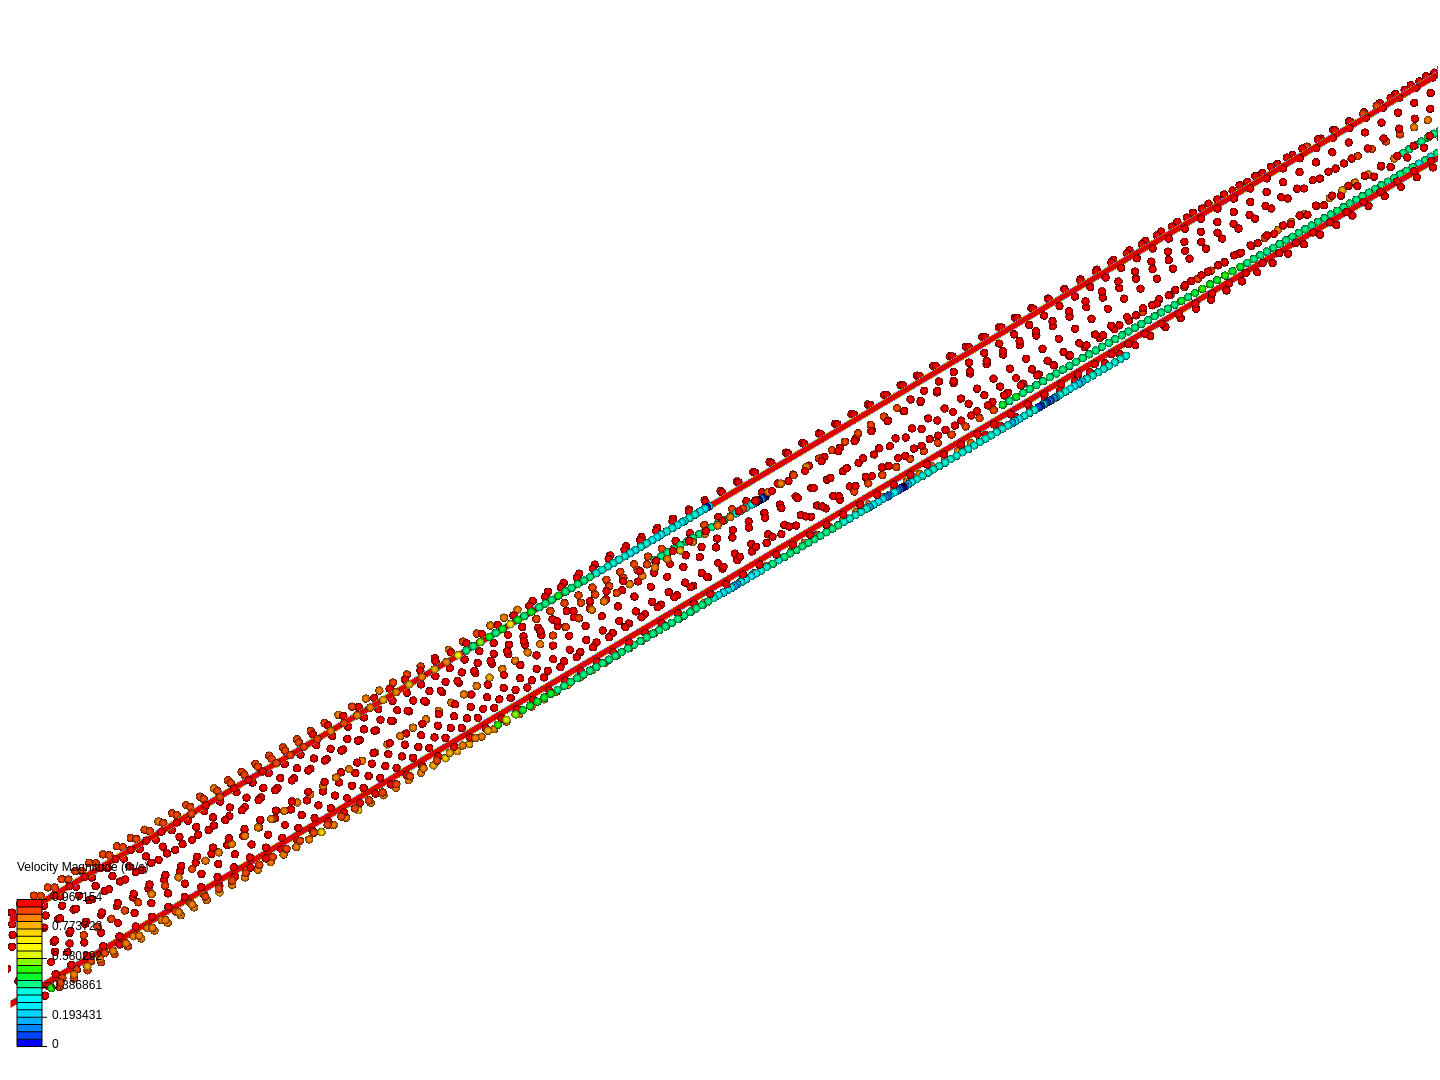 Annular pipe flow image